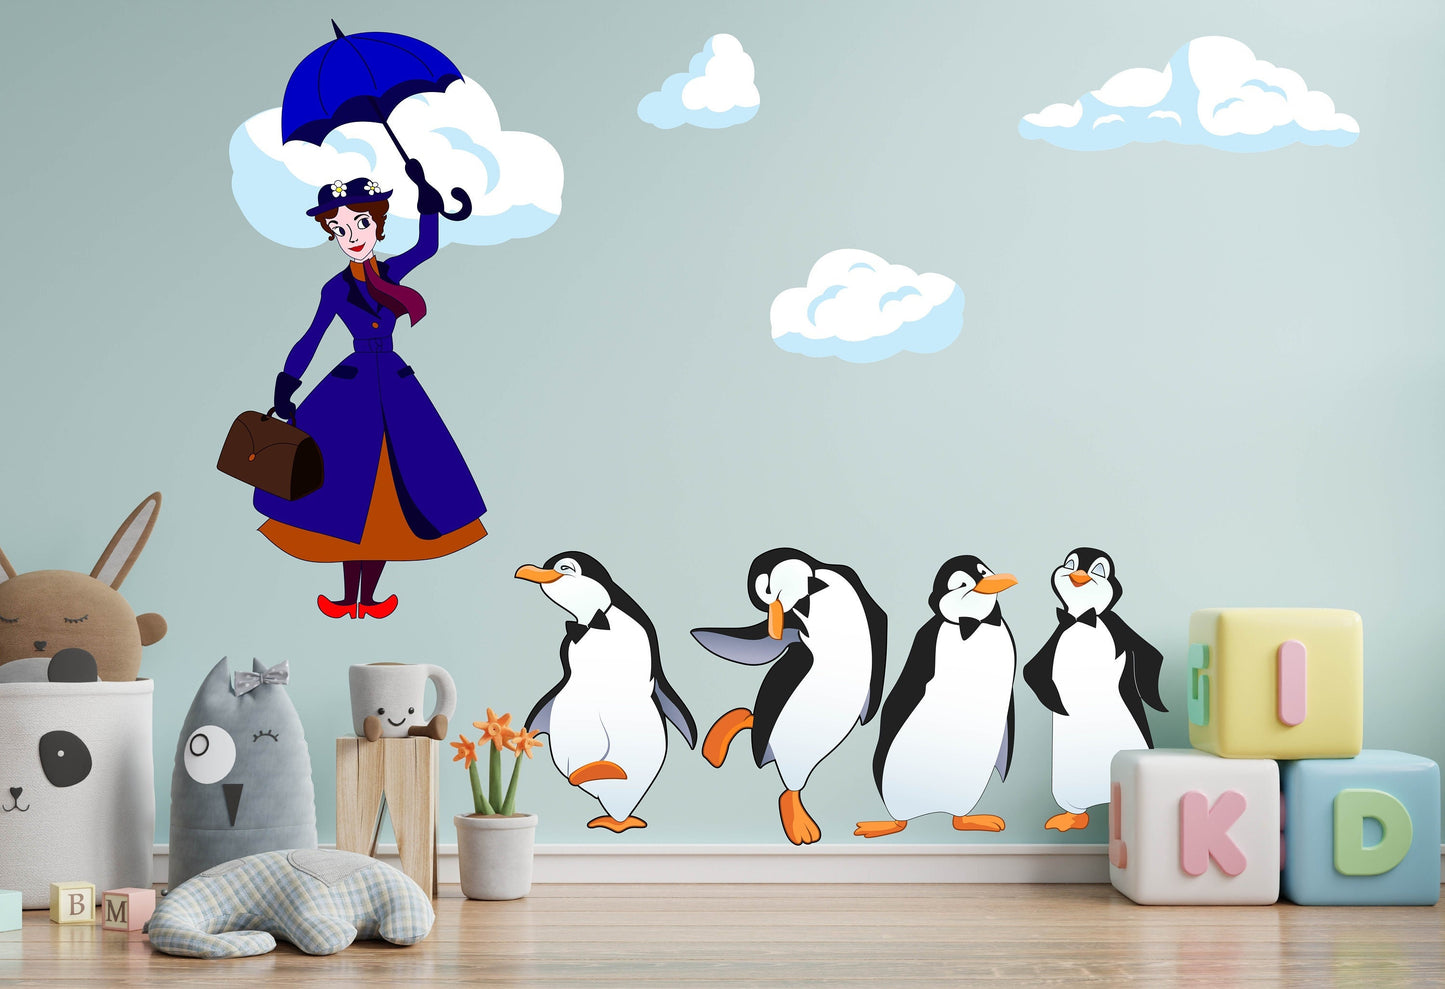 Mary and Penguins flying wall art set. Almost 4ft tall!